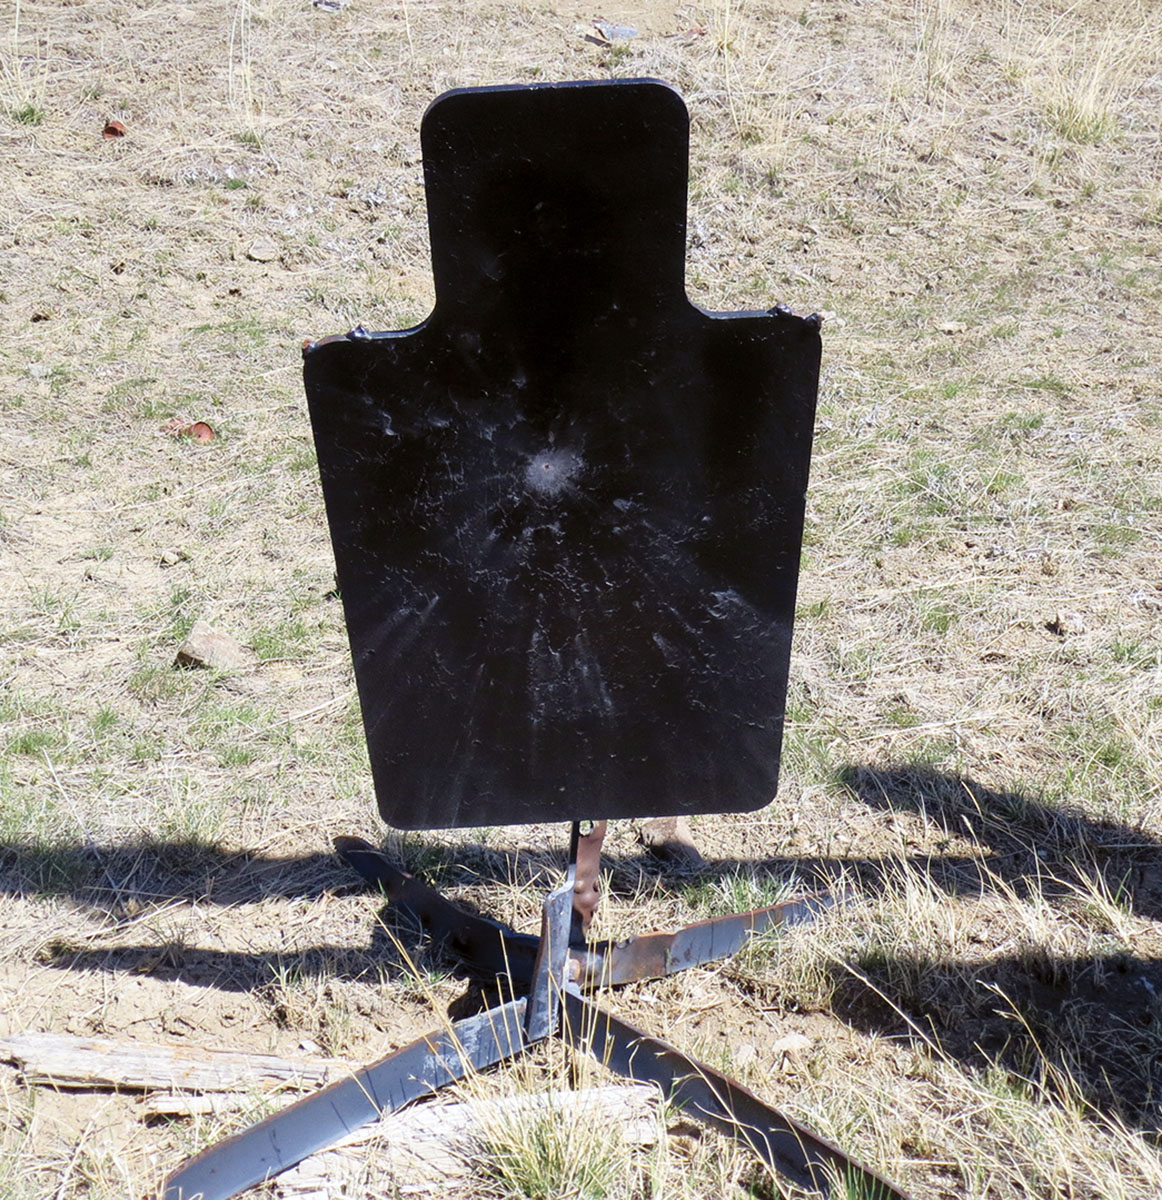 At 300 yards, it took Mike three shots to make a hit on steel but it was nearly dead center.